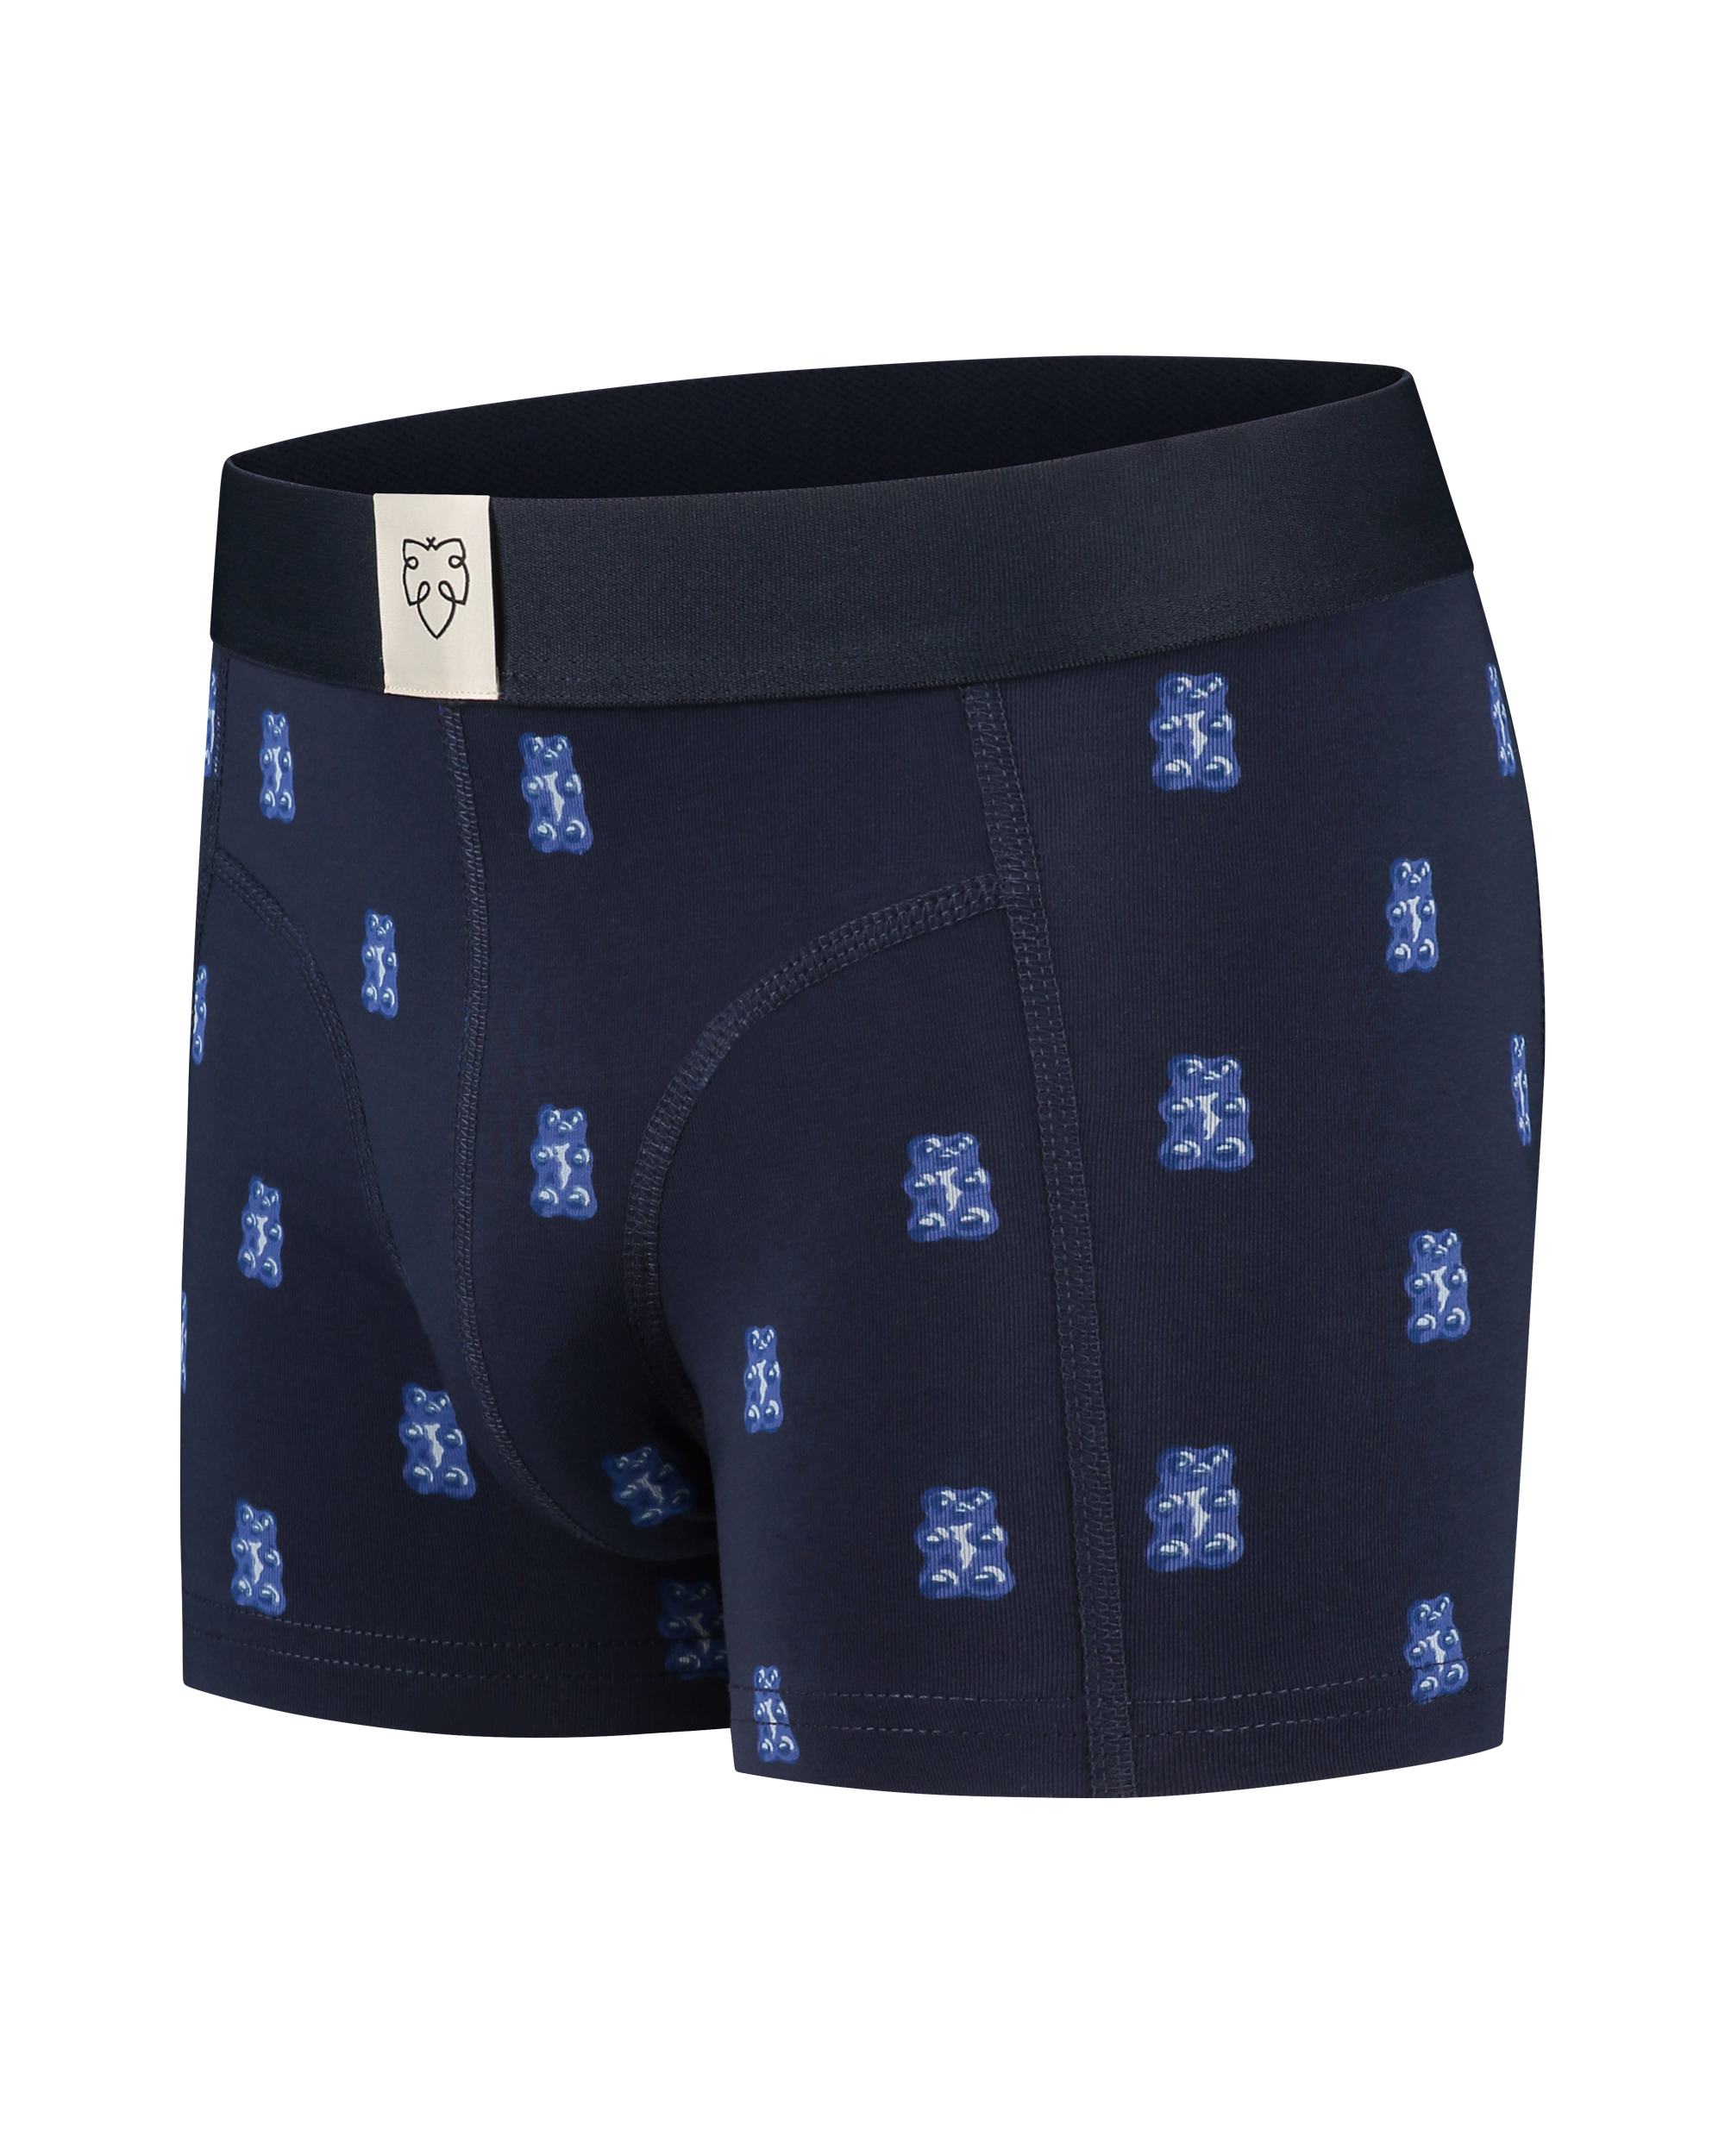 A-dam Boys Boxer briefs with gummy bears from GOTS organic cotton